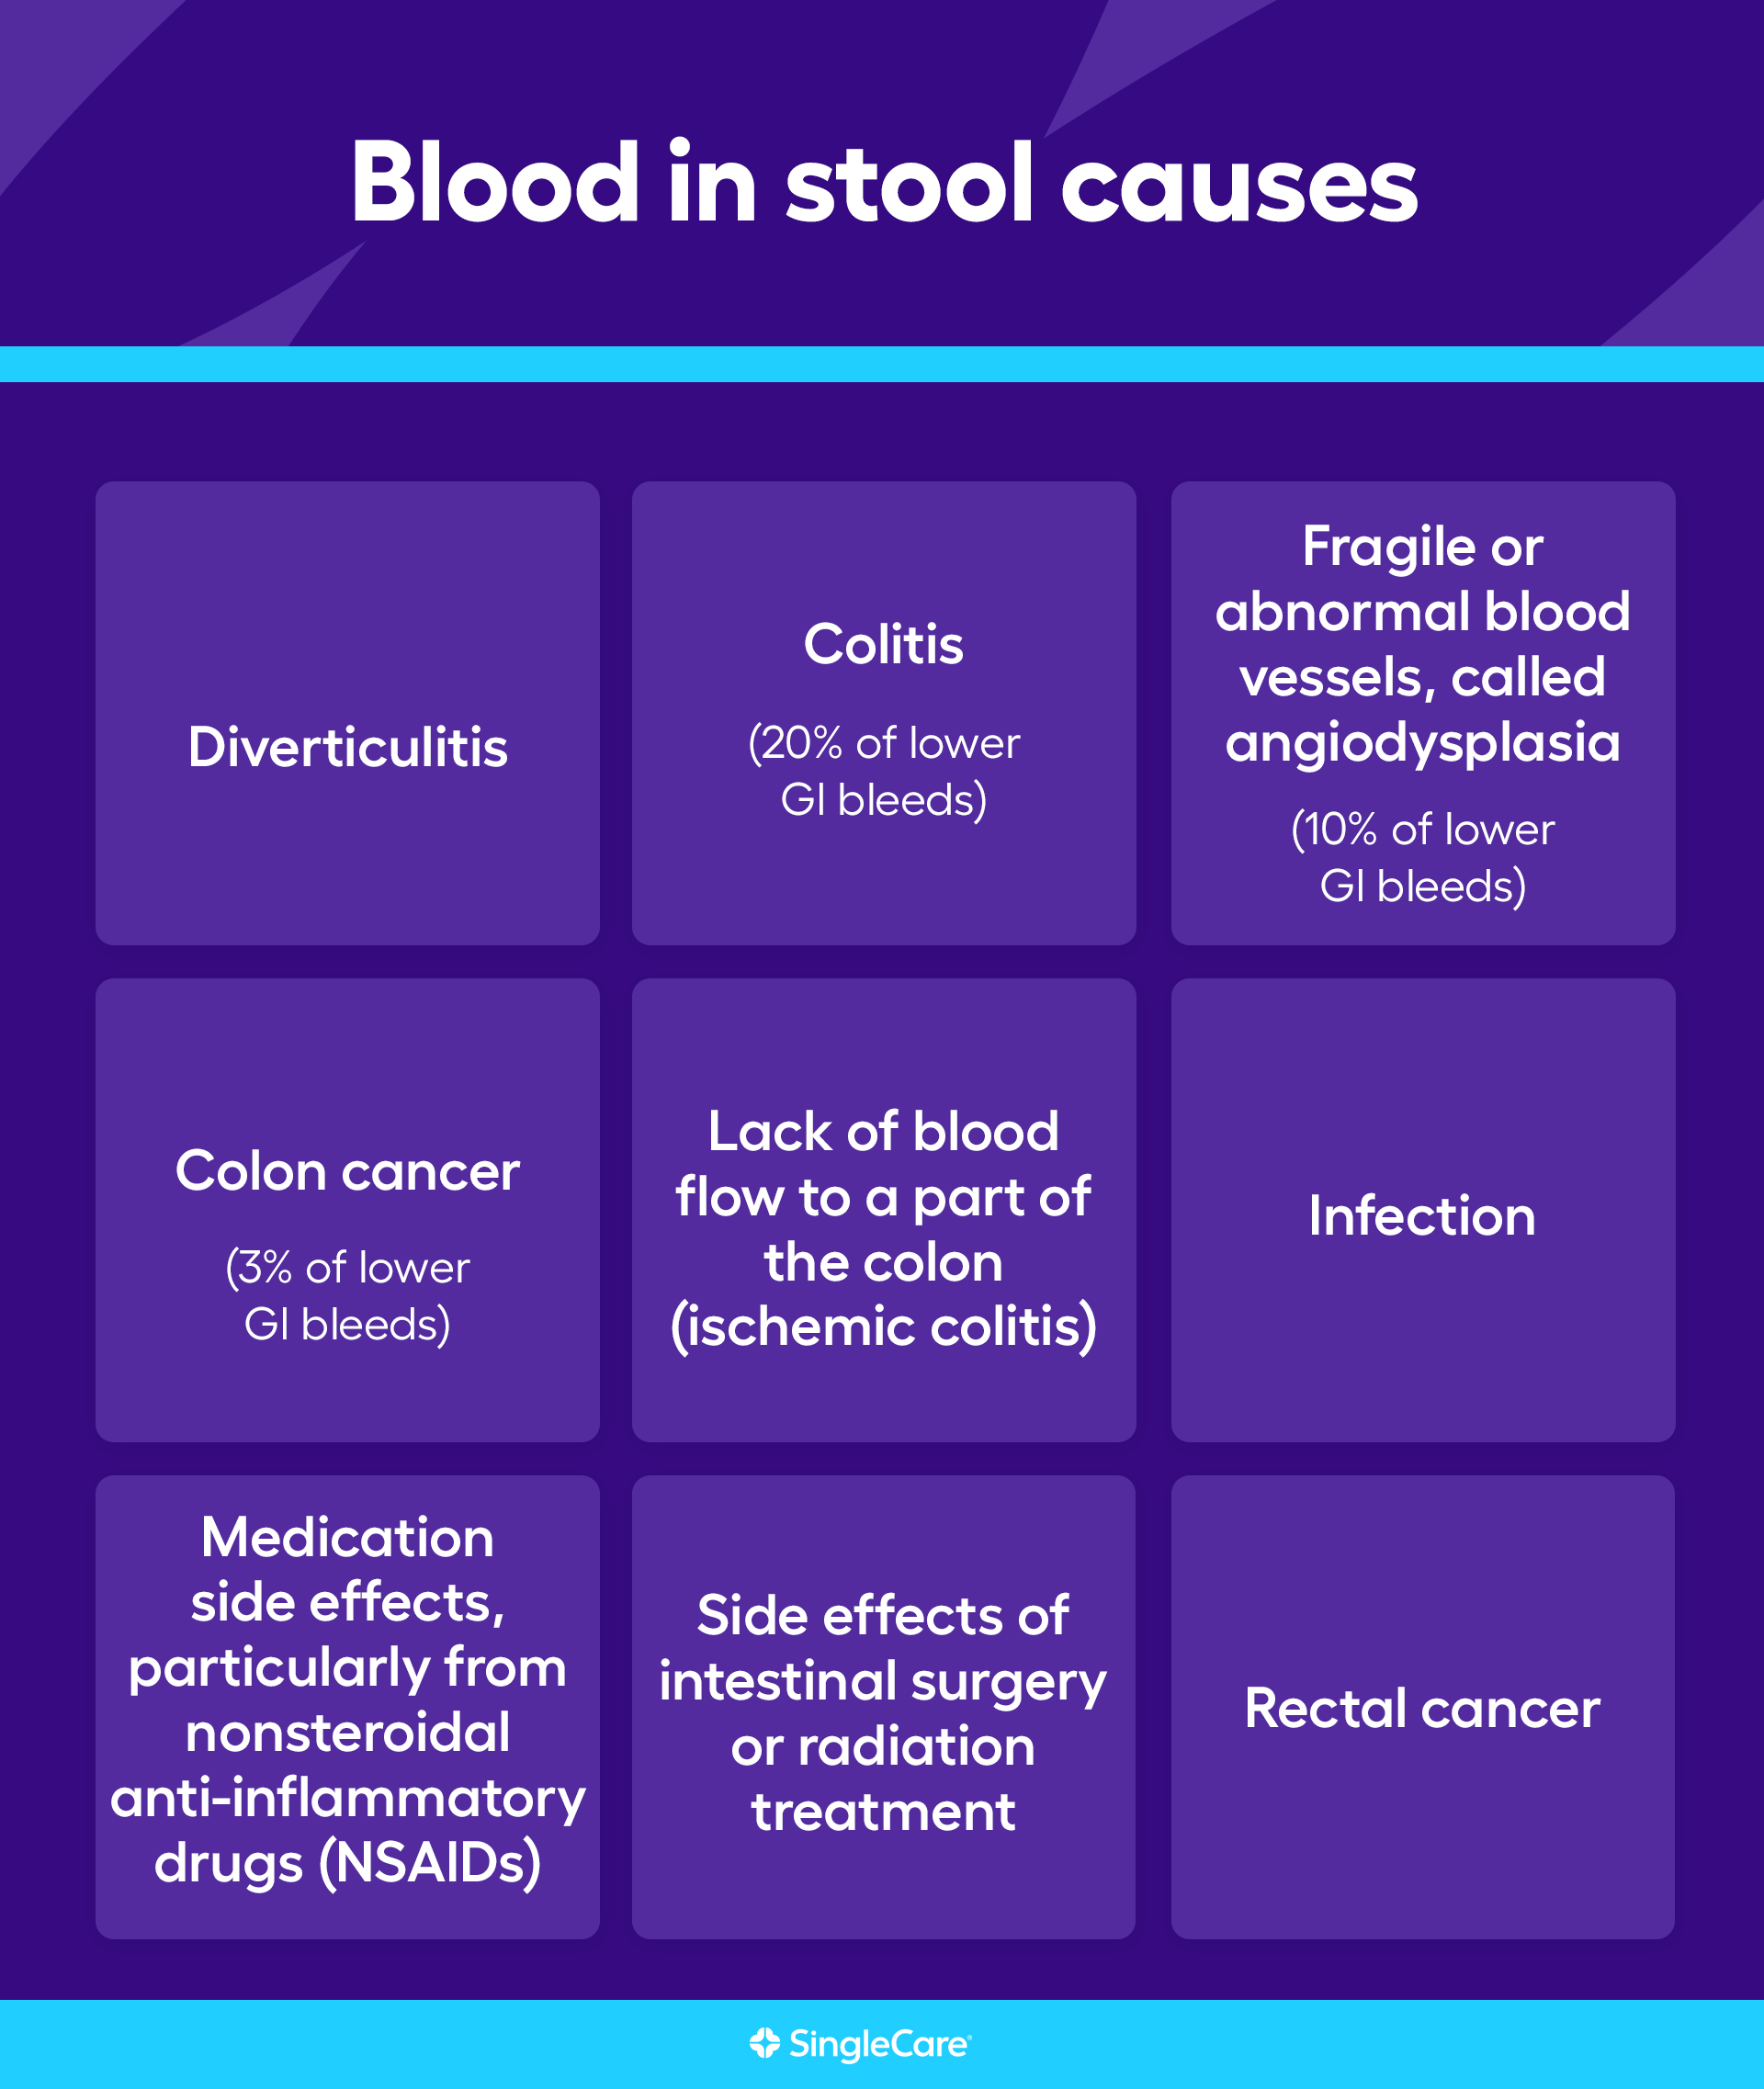 What causes blood in stool? Related conditions and treatments